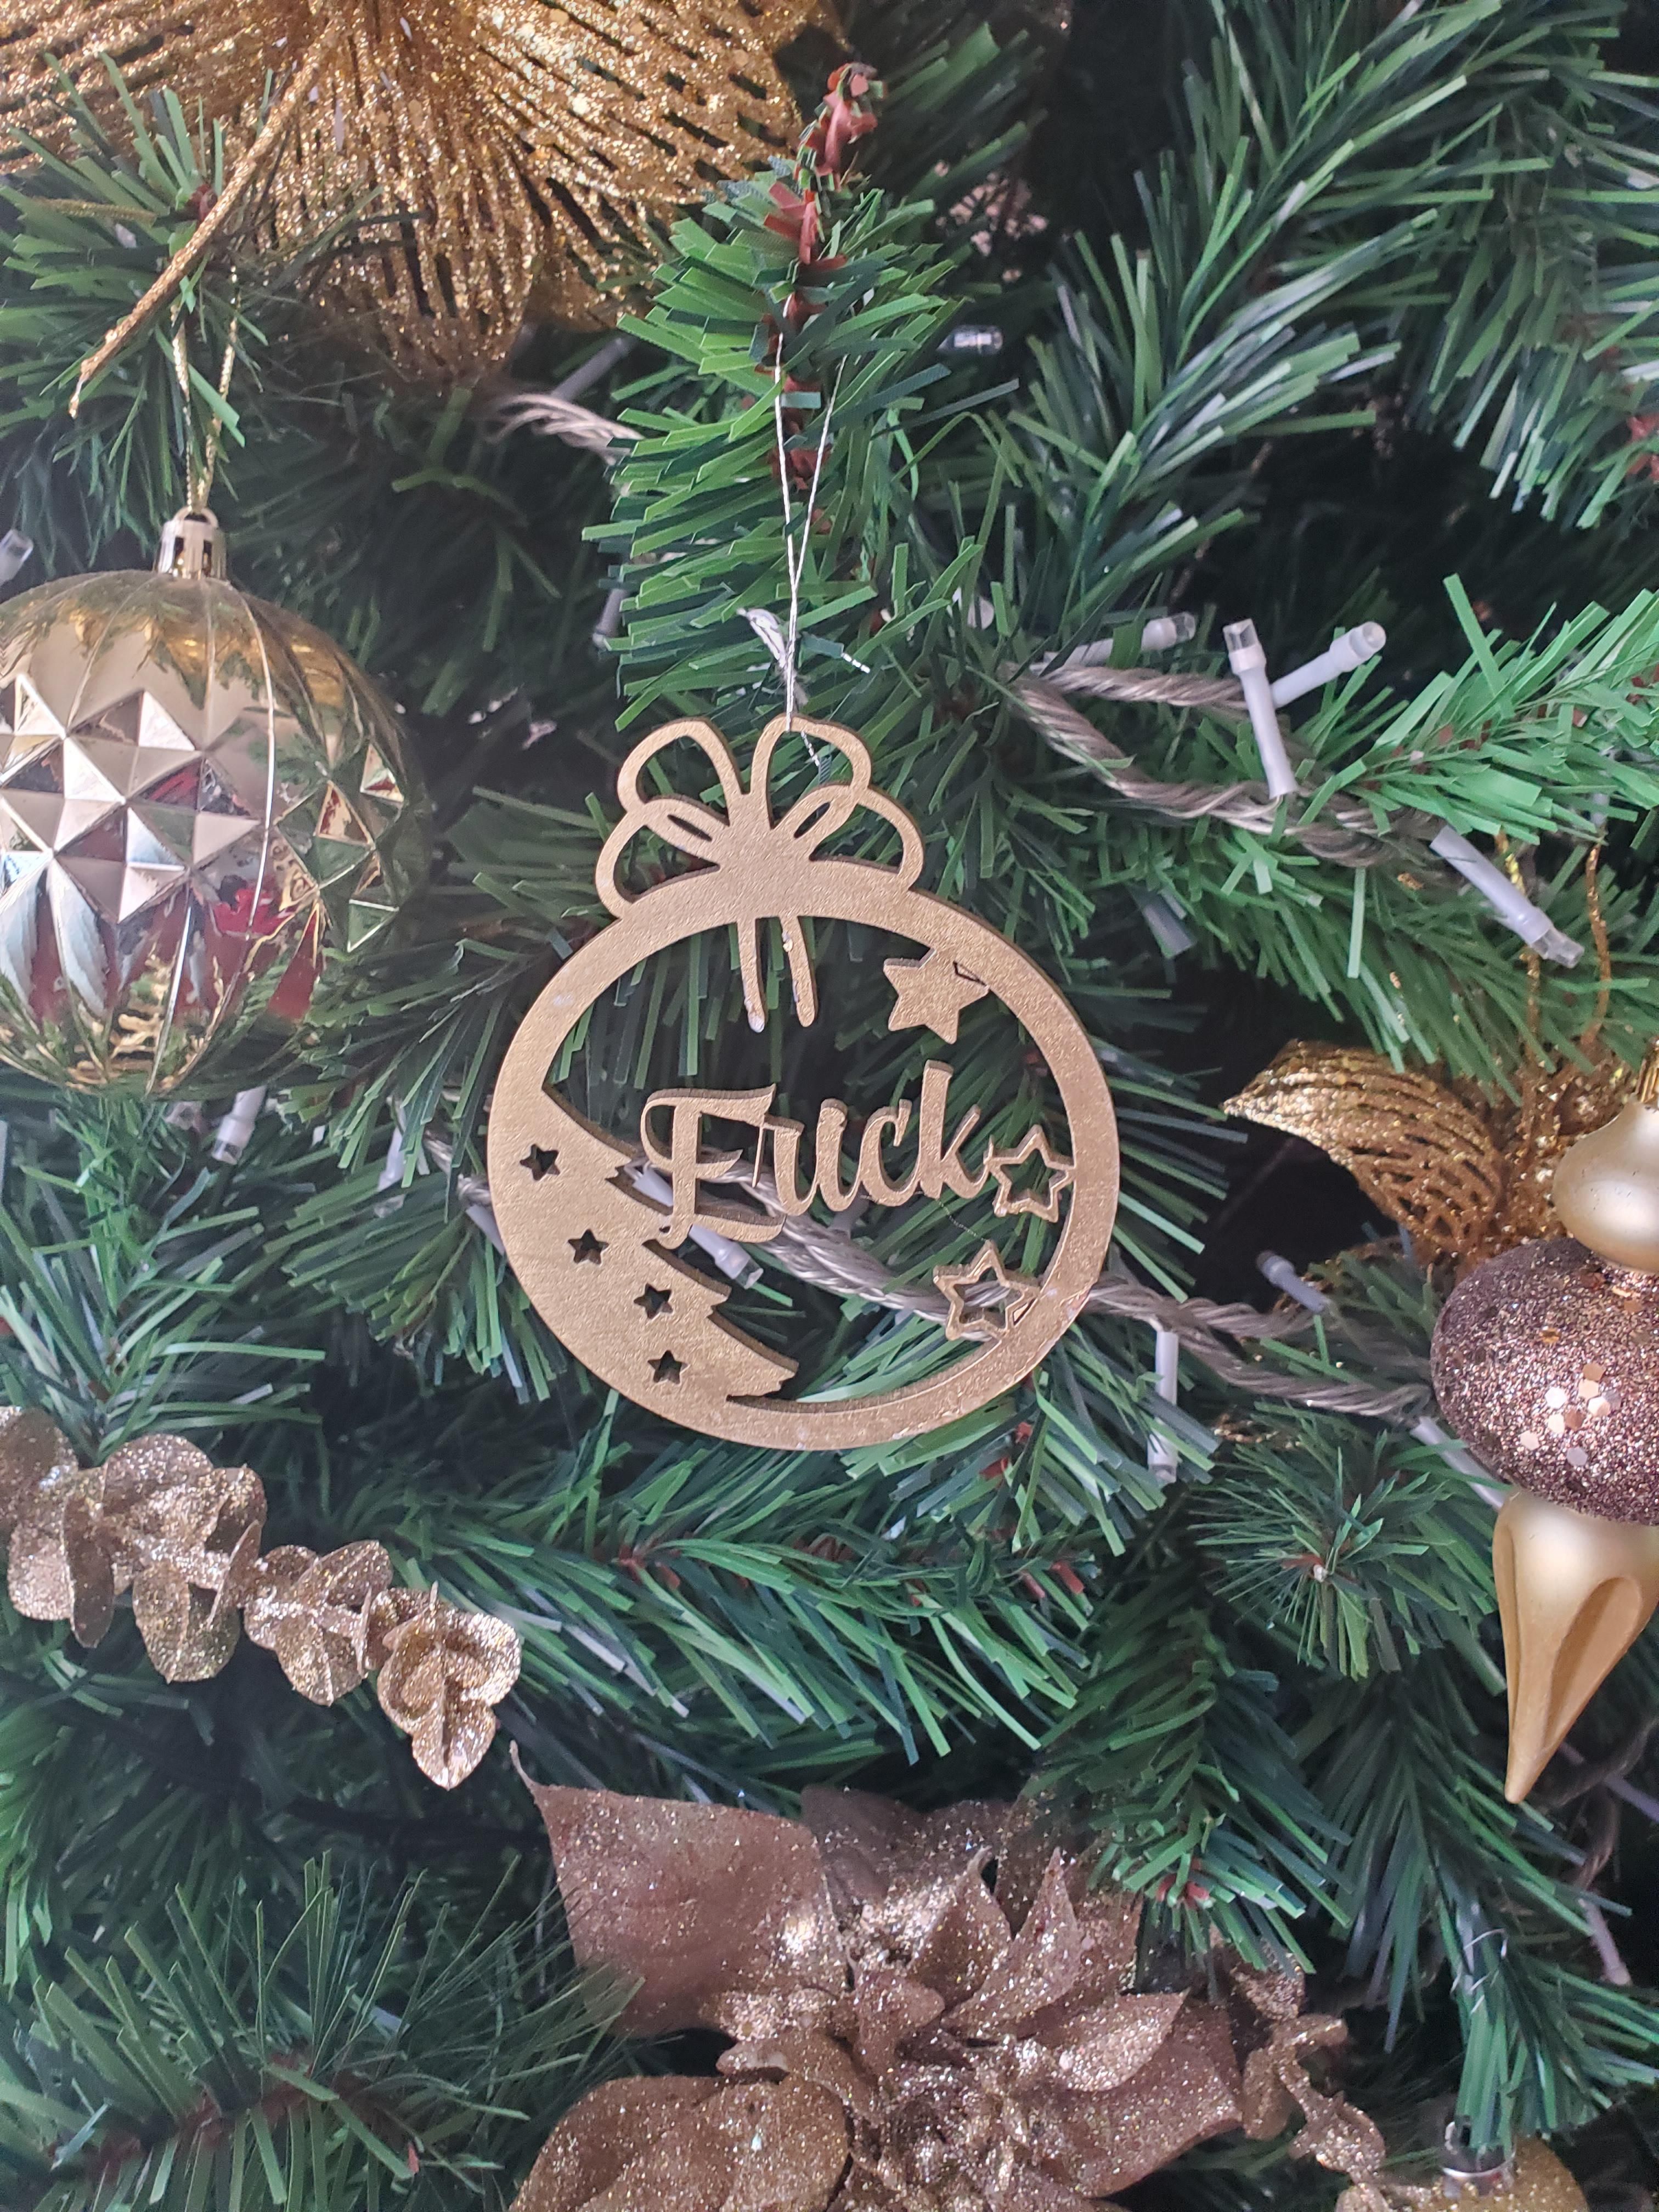 My MIL had wooden laser cut ornaments made for each of her children and grandchildren this year. The ornament for Erick didn't turn out as planned.